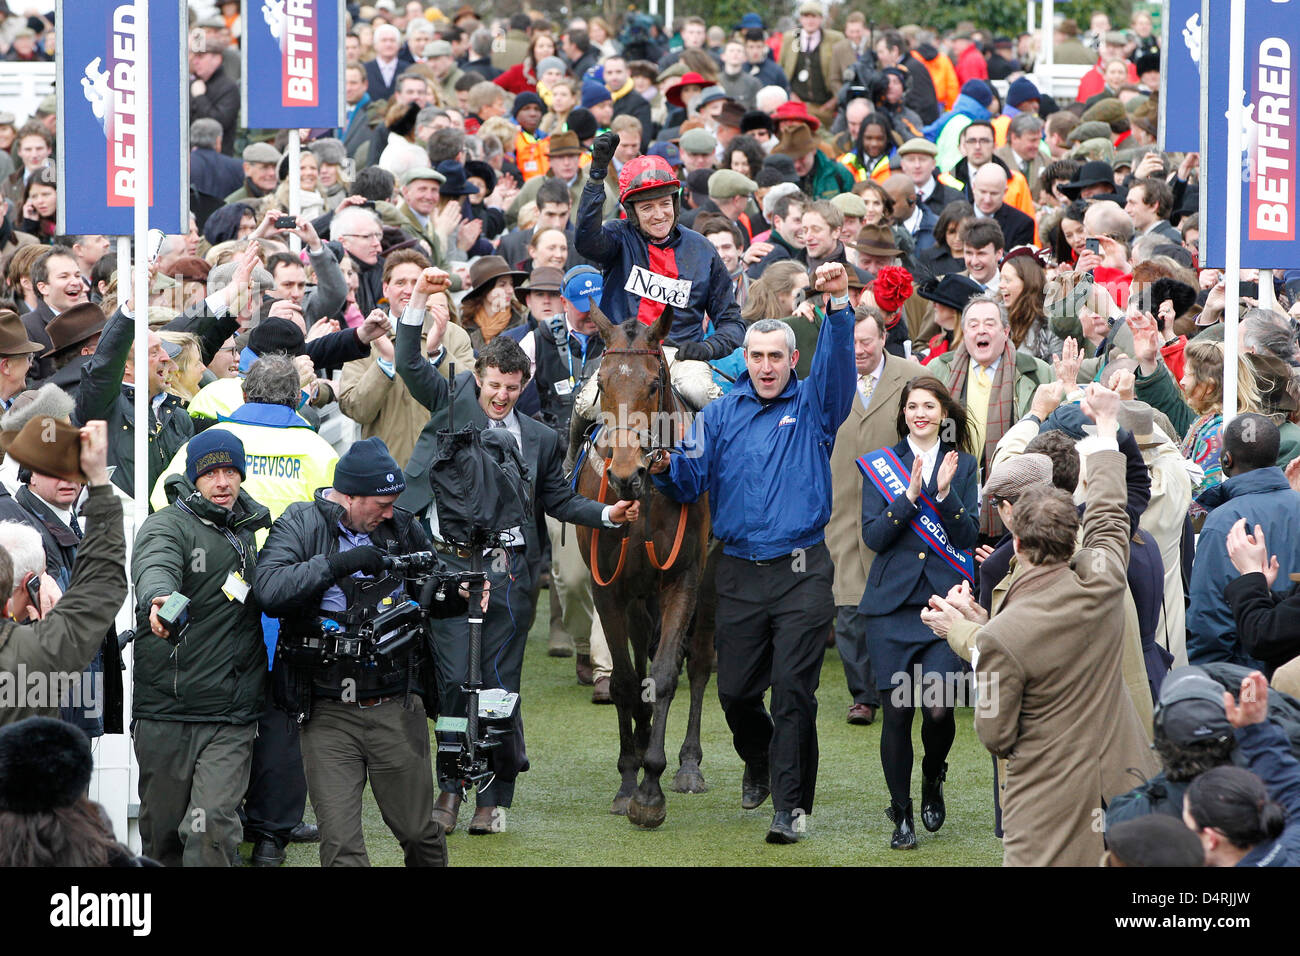 15.03.2013 - Cheltenham; Winners presentation with Bobs Worth, ridden by Barry Geraghty after winning the Betfred Cheltenham Gold Cup Chase Grade 1. Credit: Lajos-Eric Balogh/turfstock.com Stock Photo